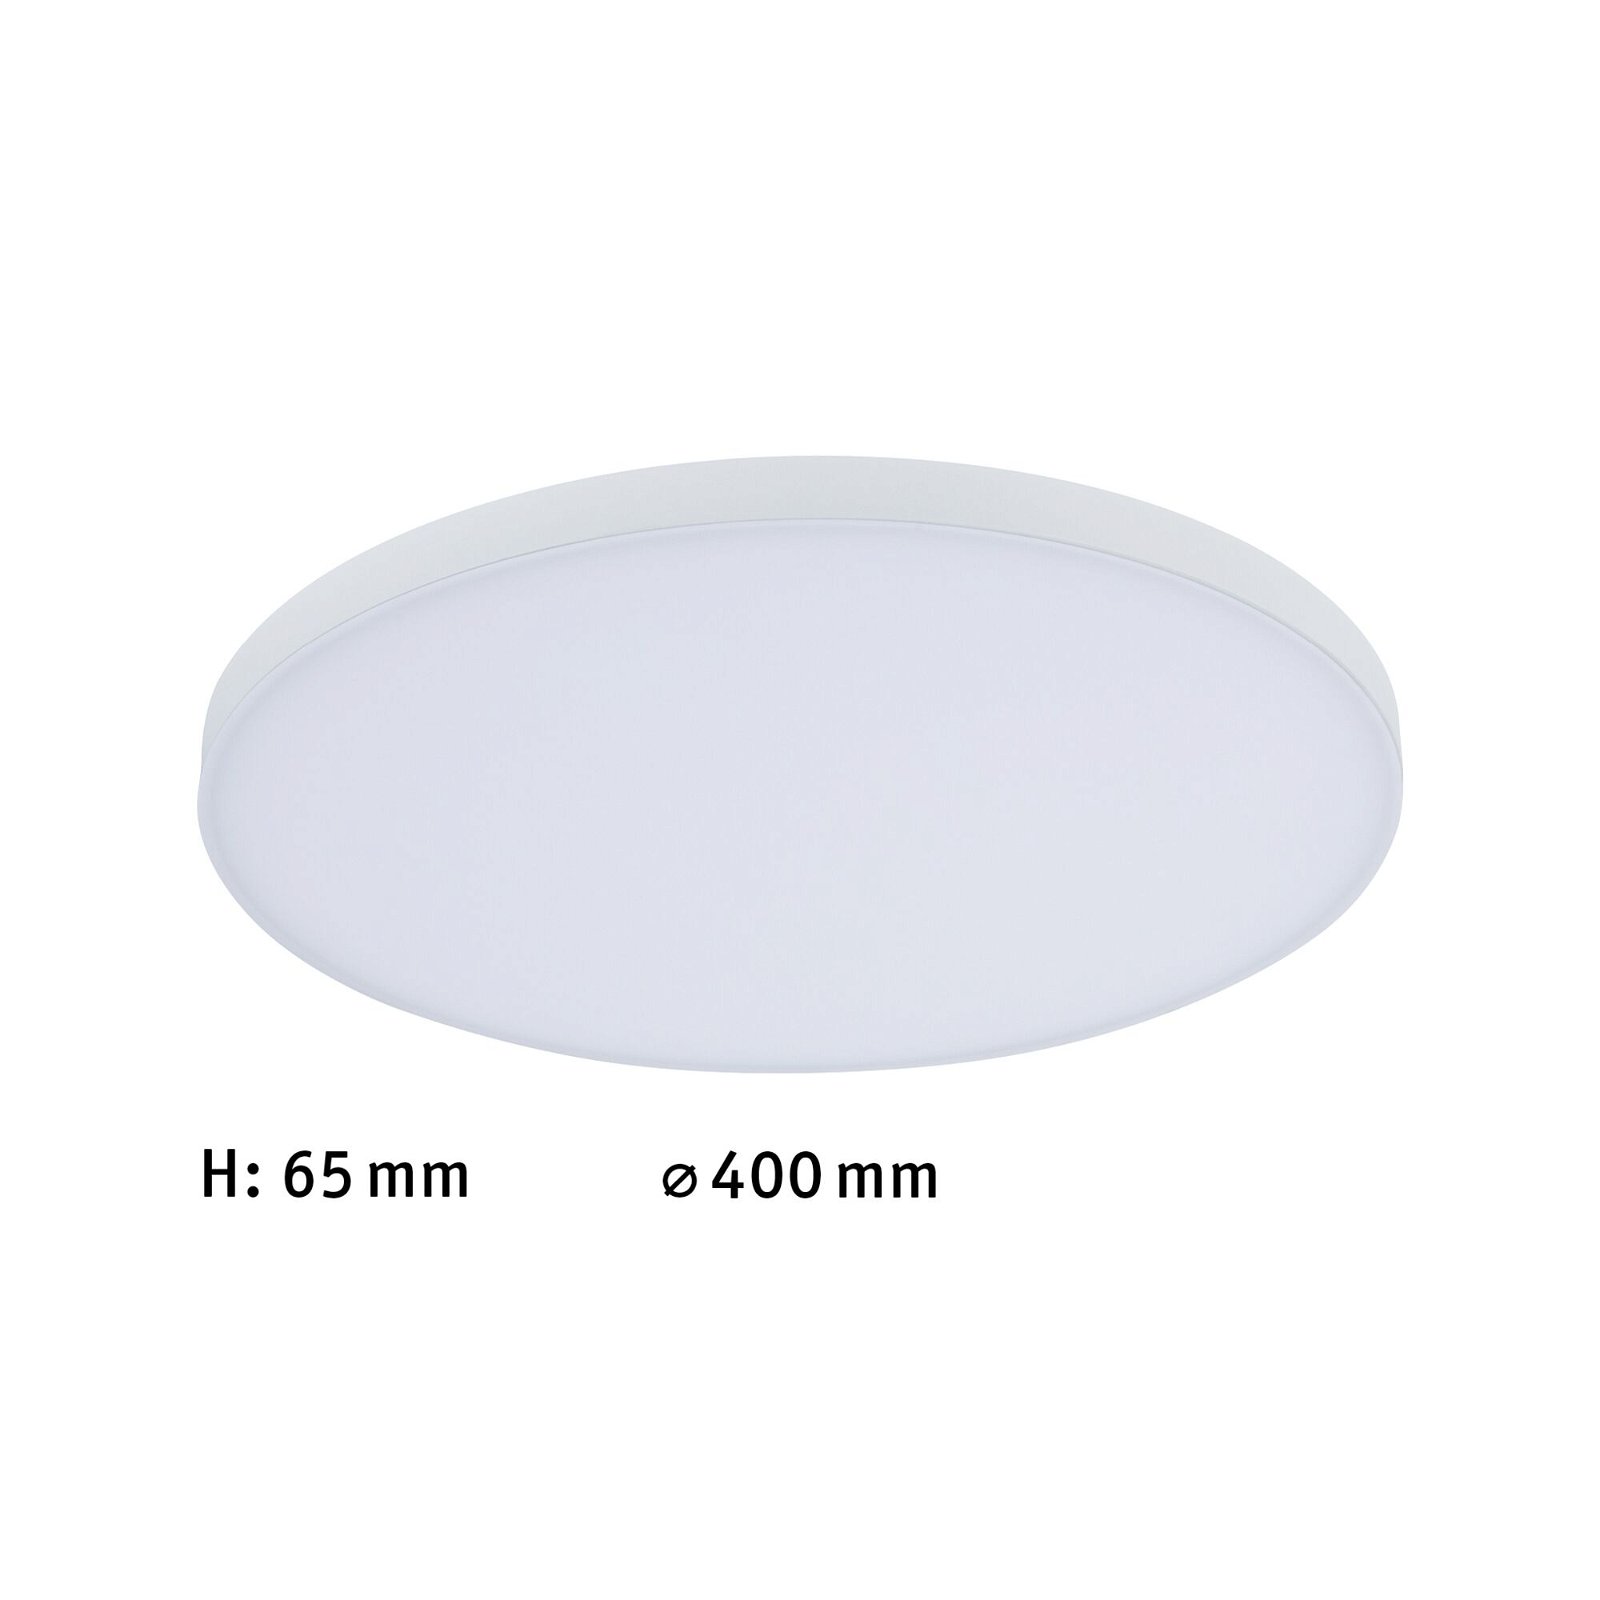 LED Panel Smart Home Zigbee Velora round 400mm 22W 2200lm Tunable White White dimmable